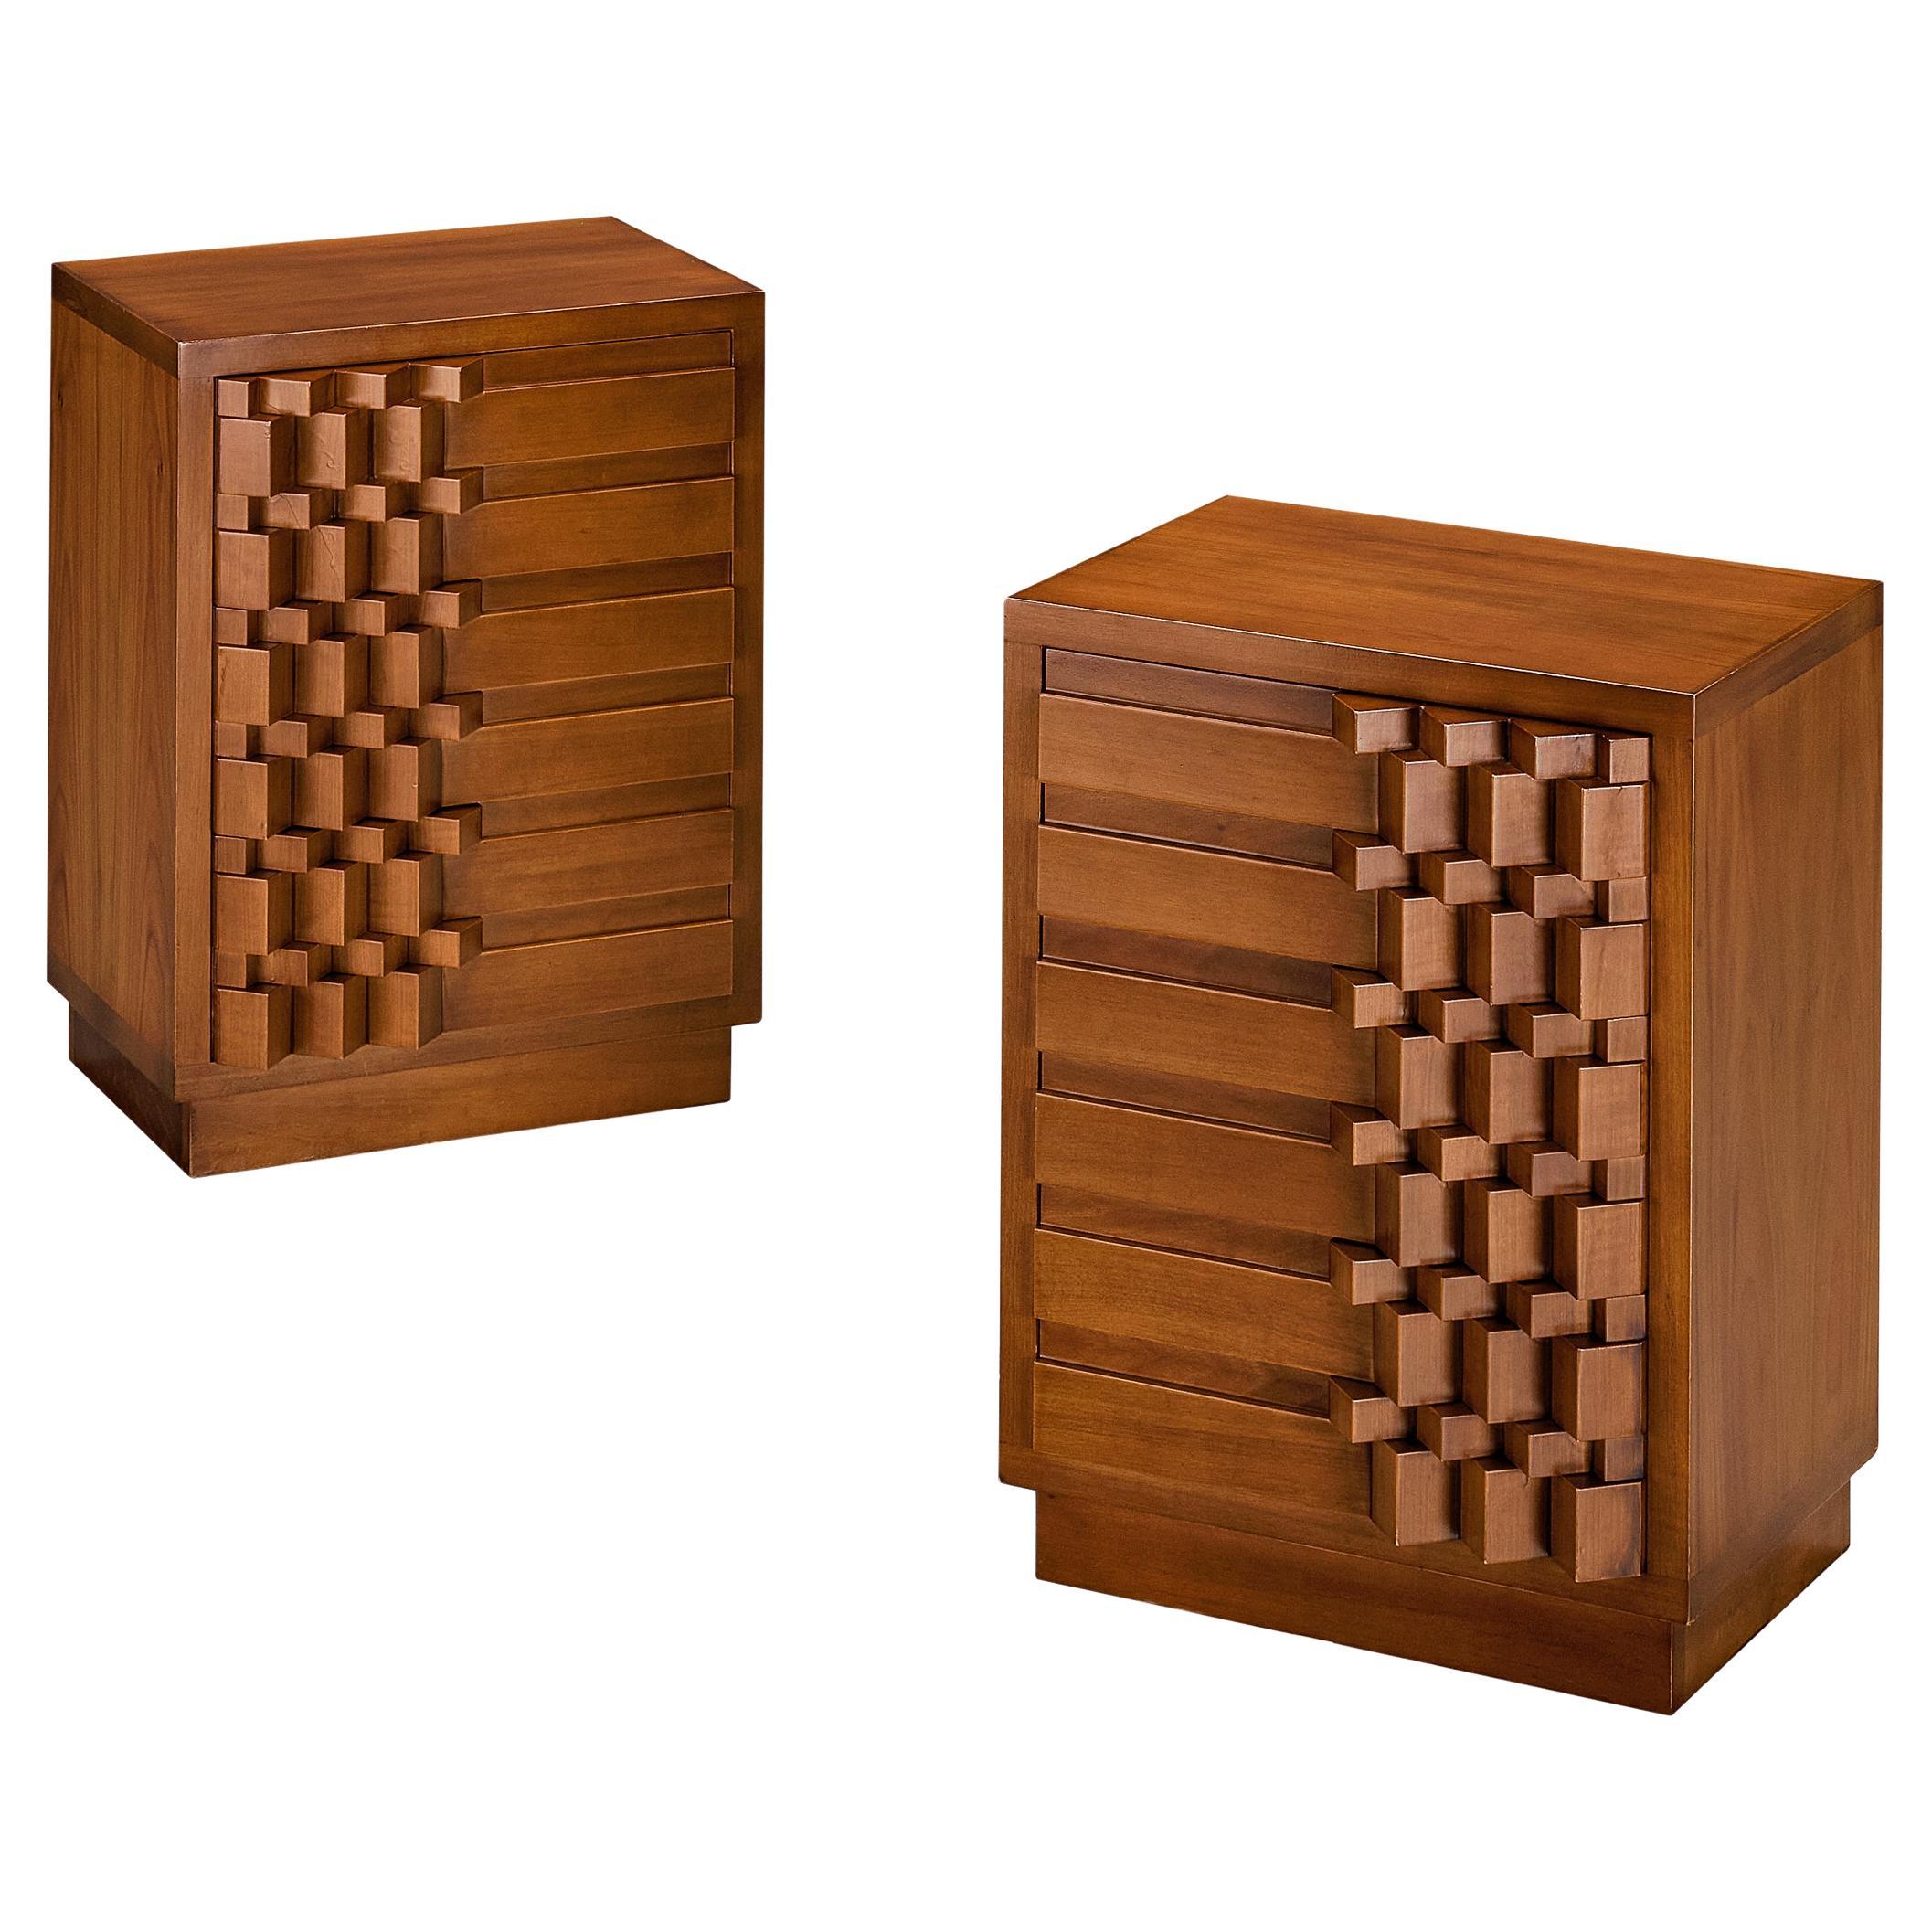 Luciano Frigerio 'Diamante' Pair of Bed Tables with Cubist Graphic Front  For Sale